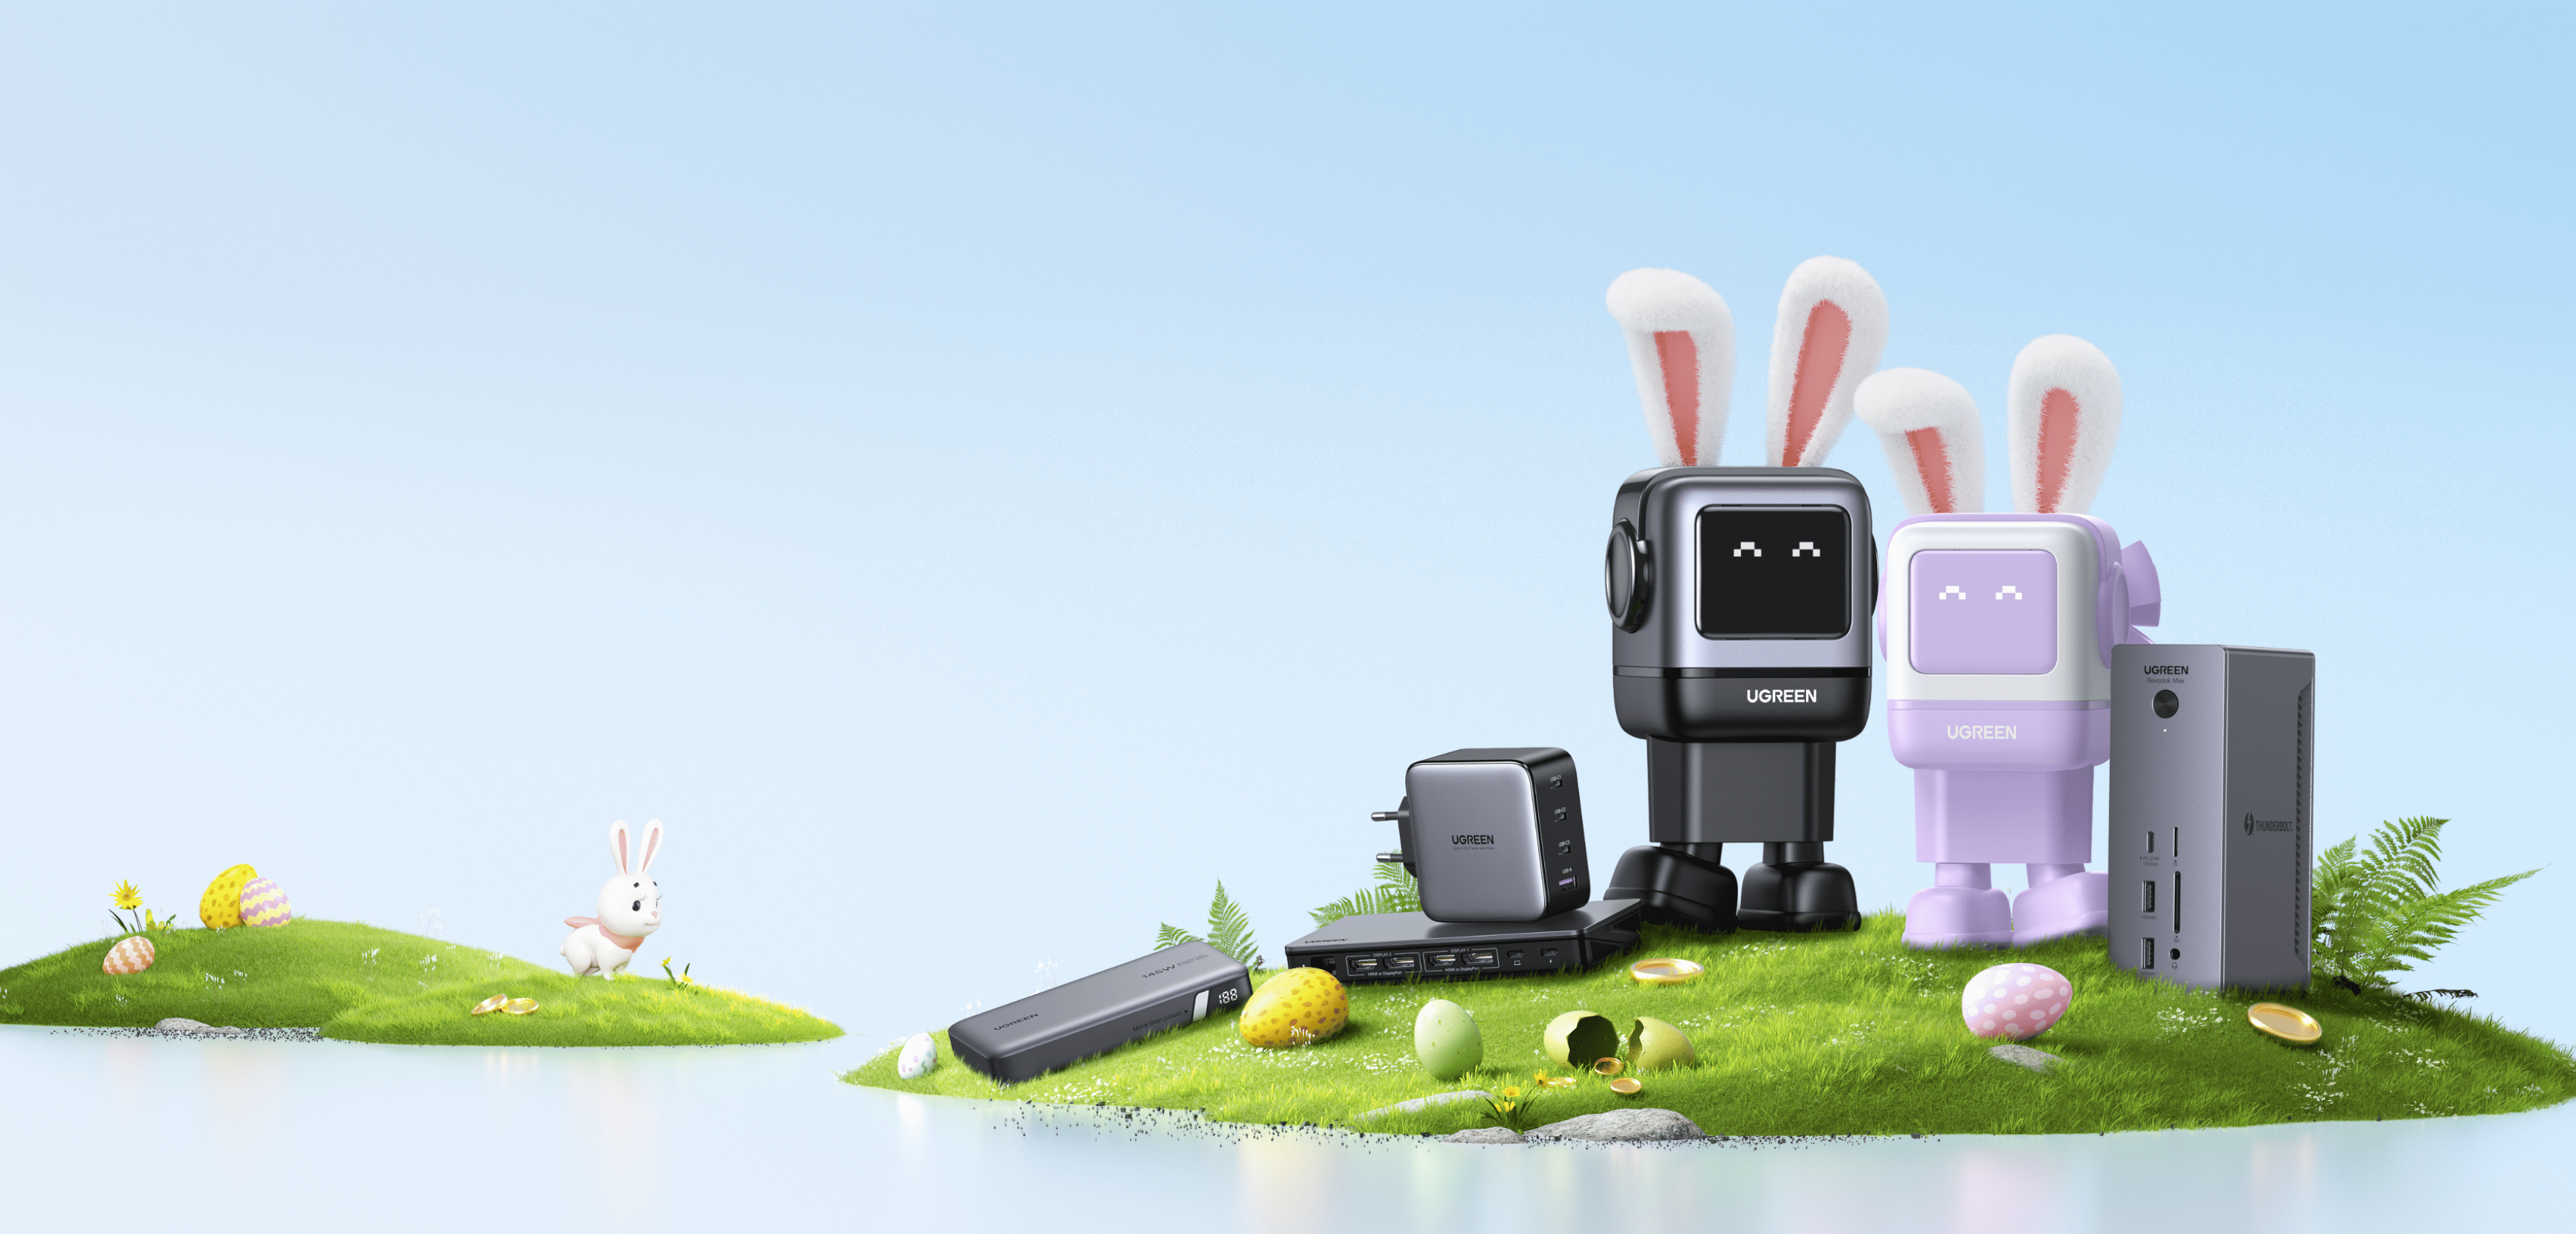 Tech up your Easter with UGREEN